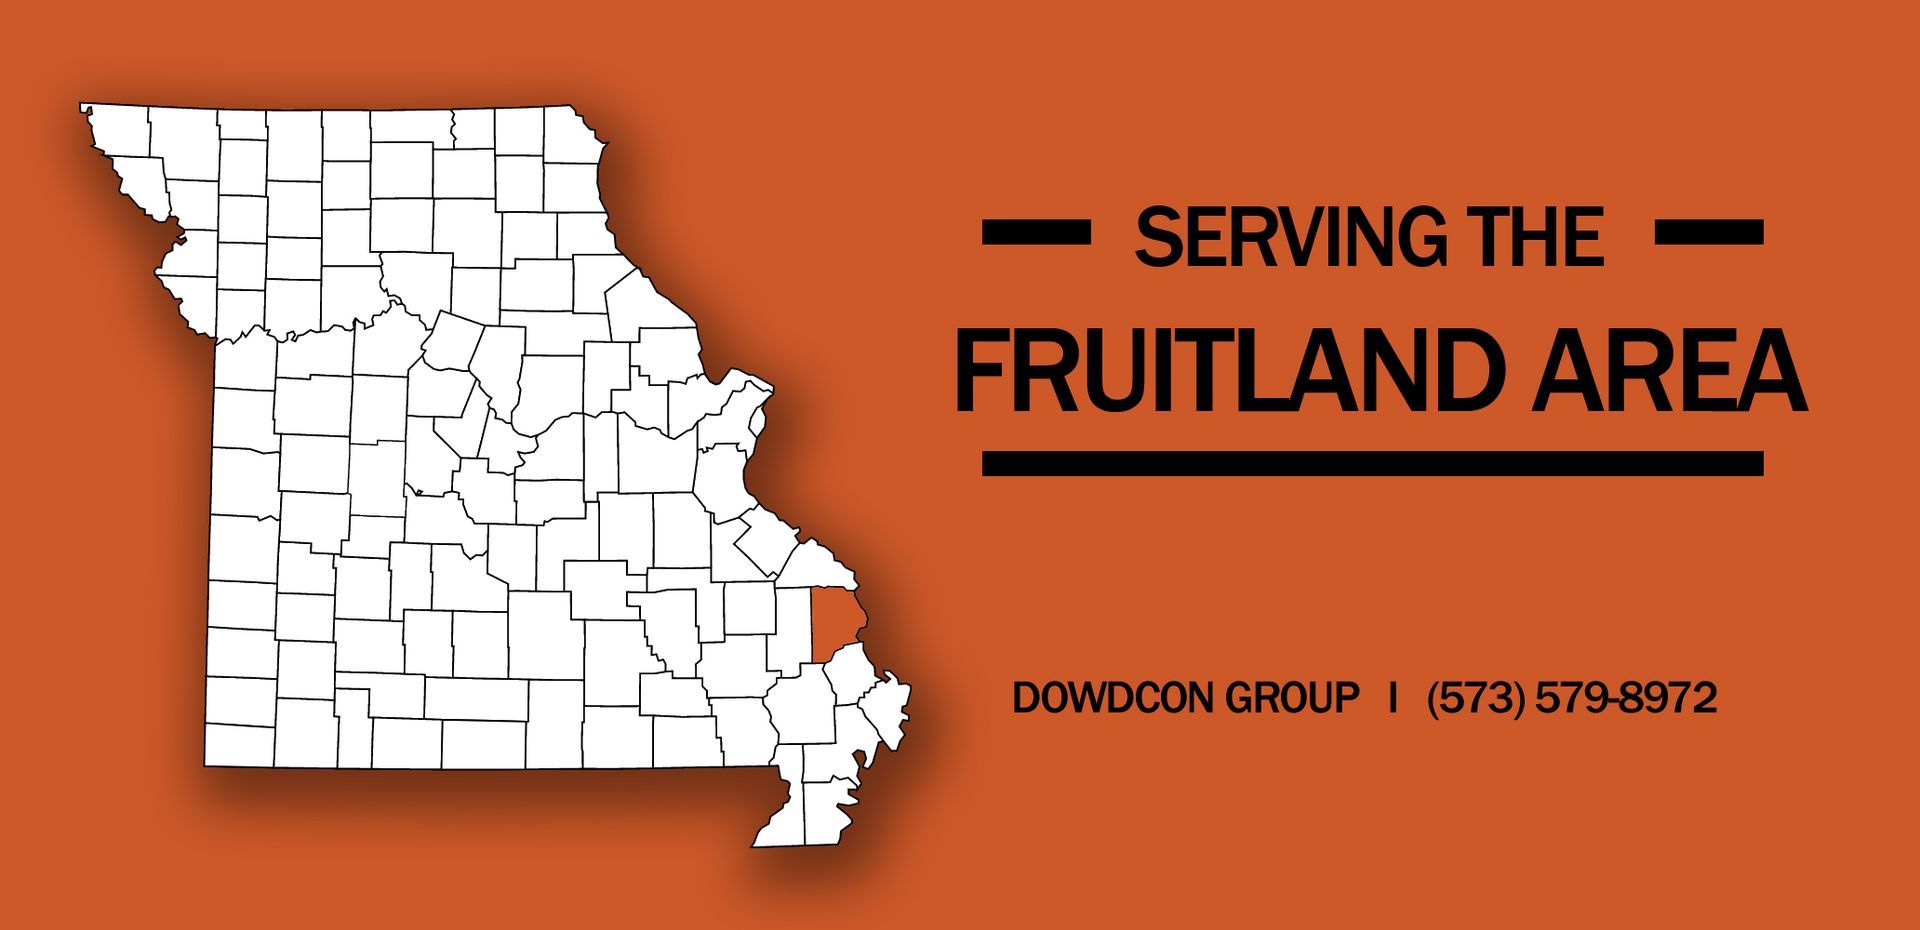 Dowd Brothers Is Proud to Build Custom Homes & Spec Homes in Fruitland, MO.